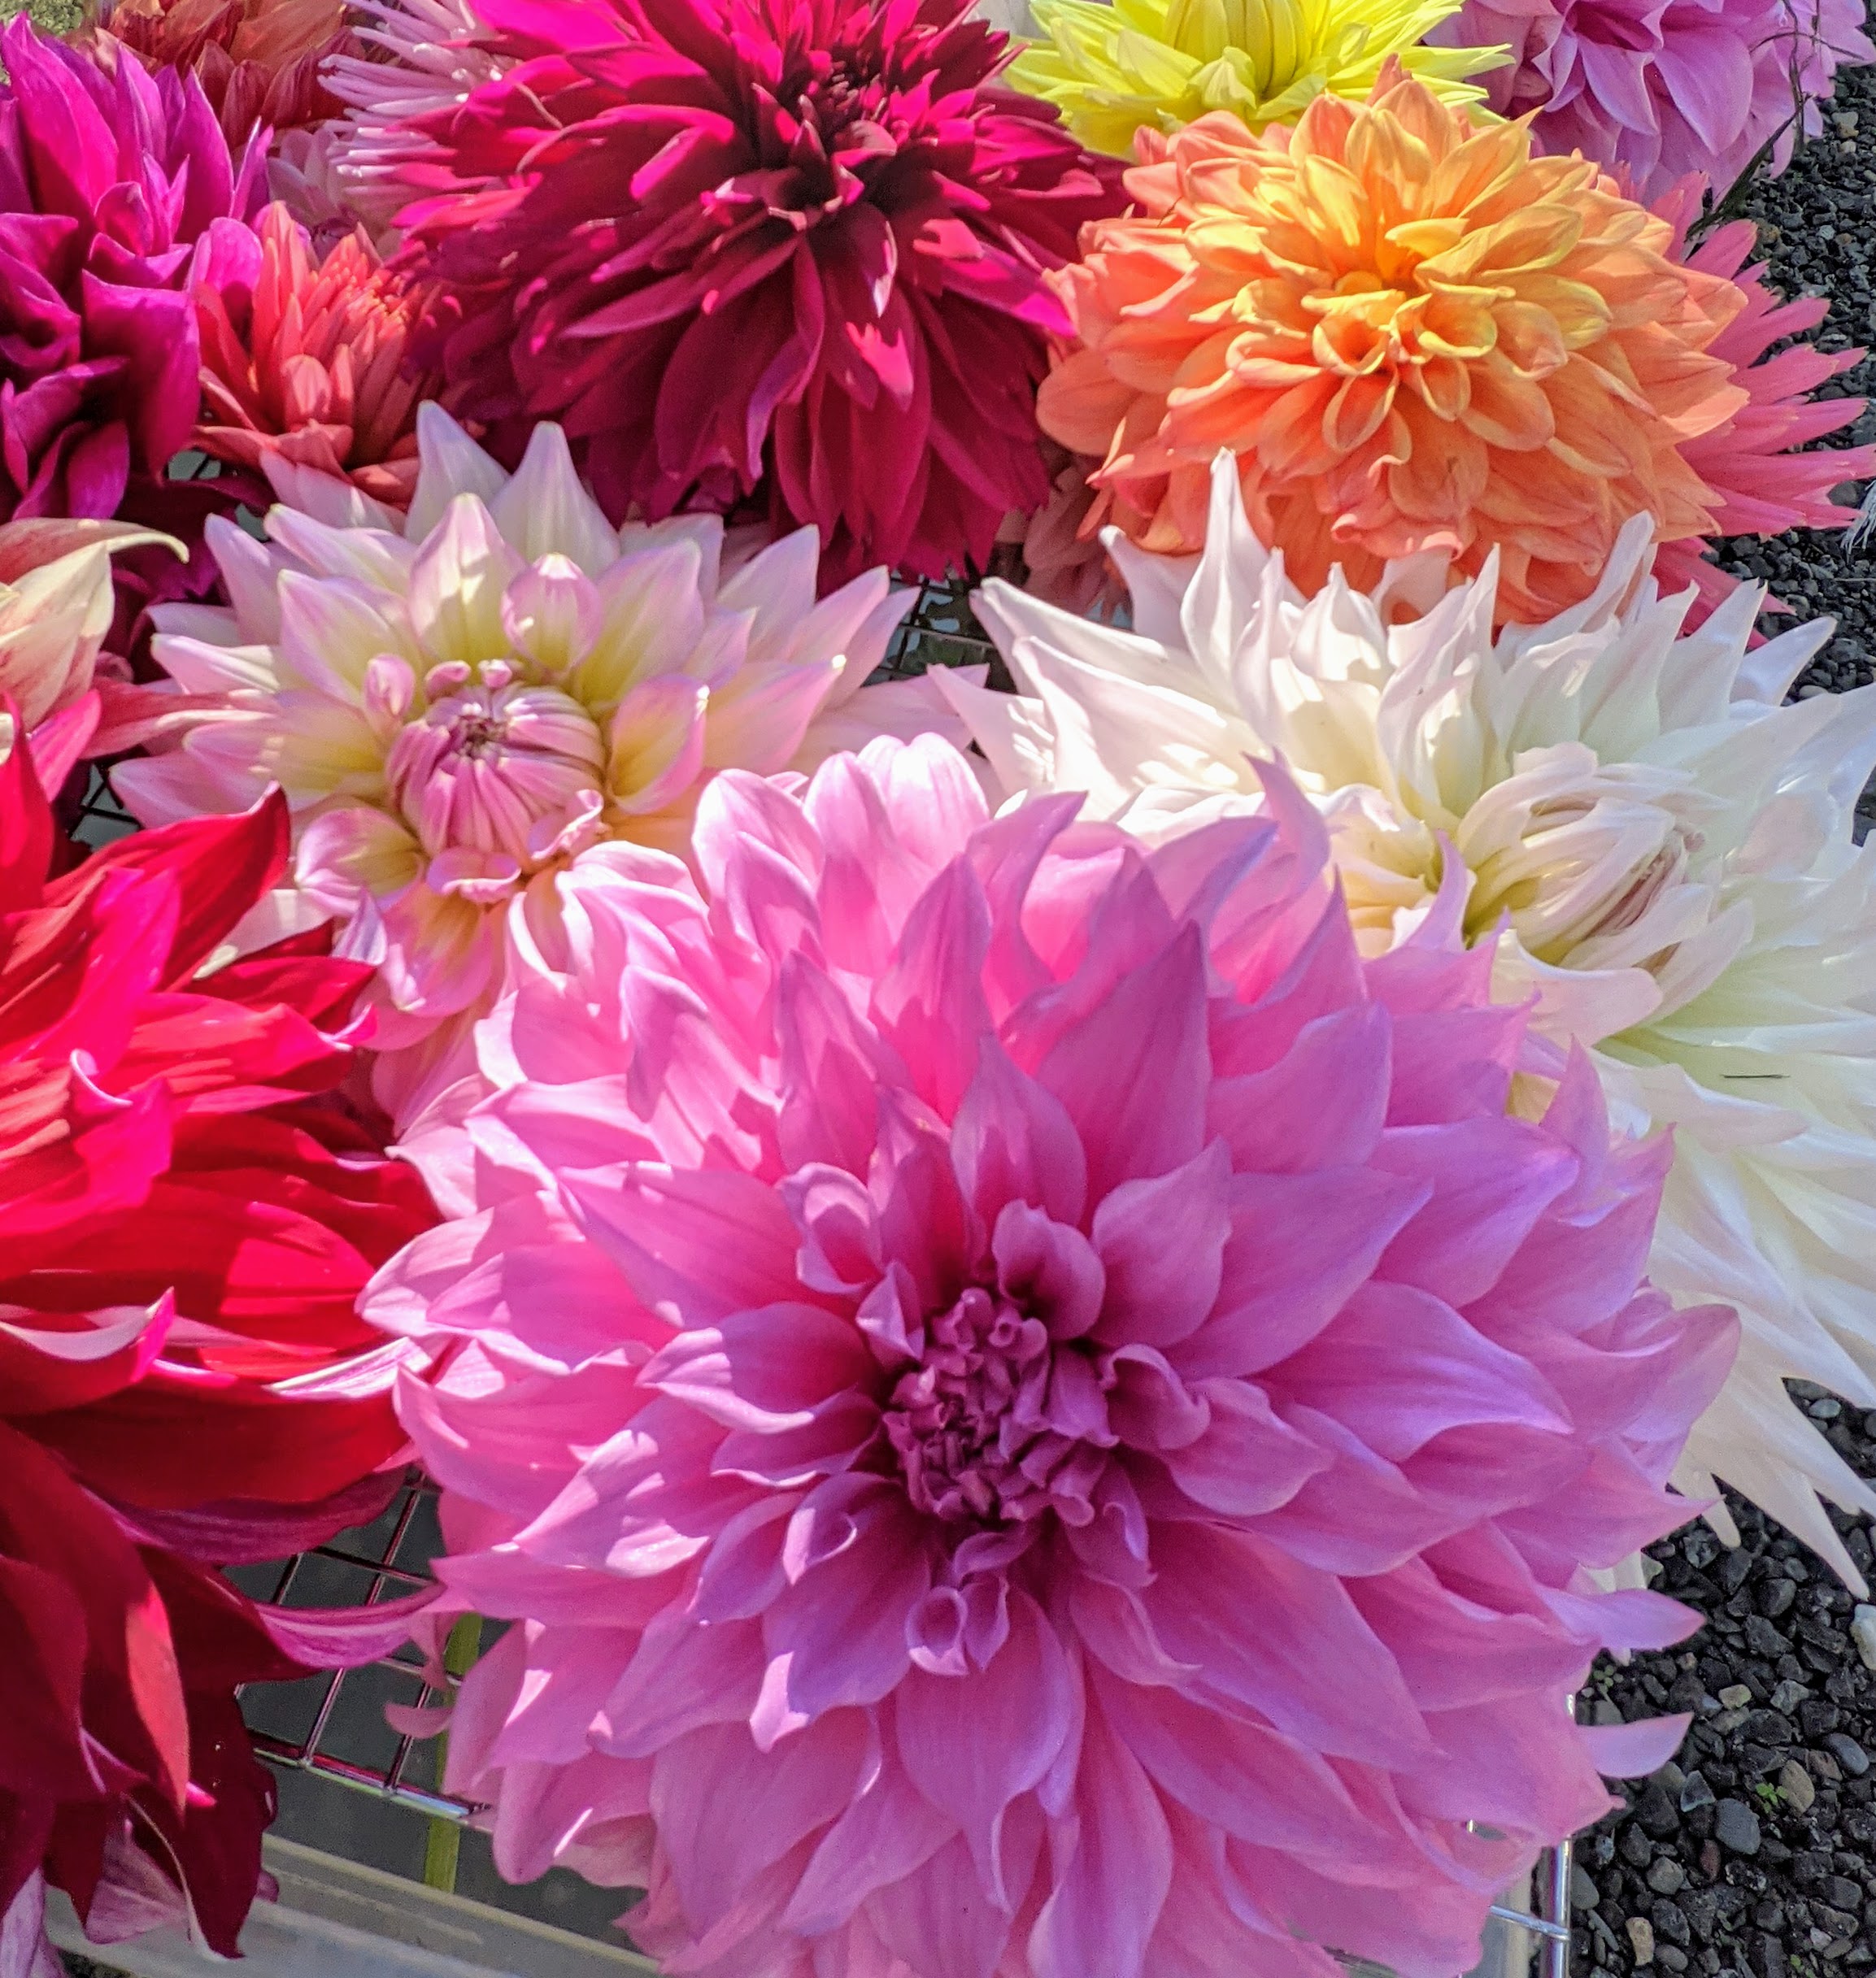 March to June: Start planting dahlias